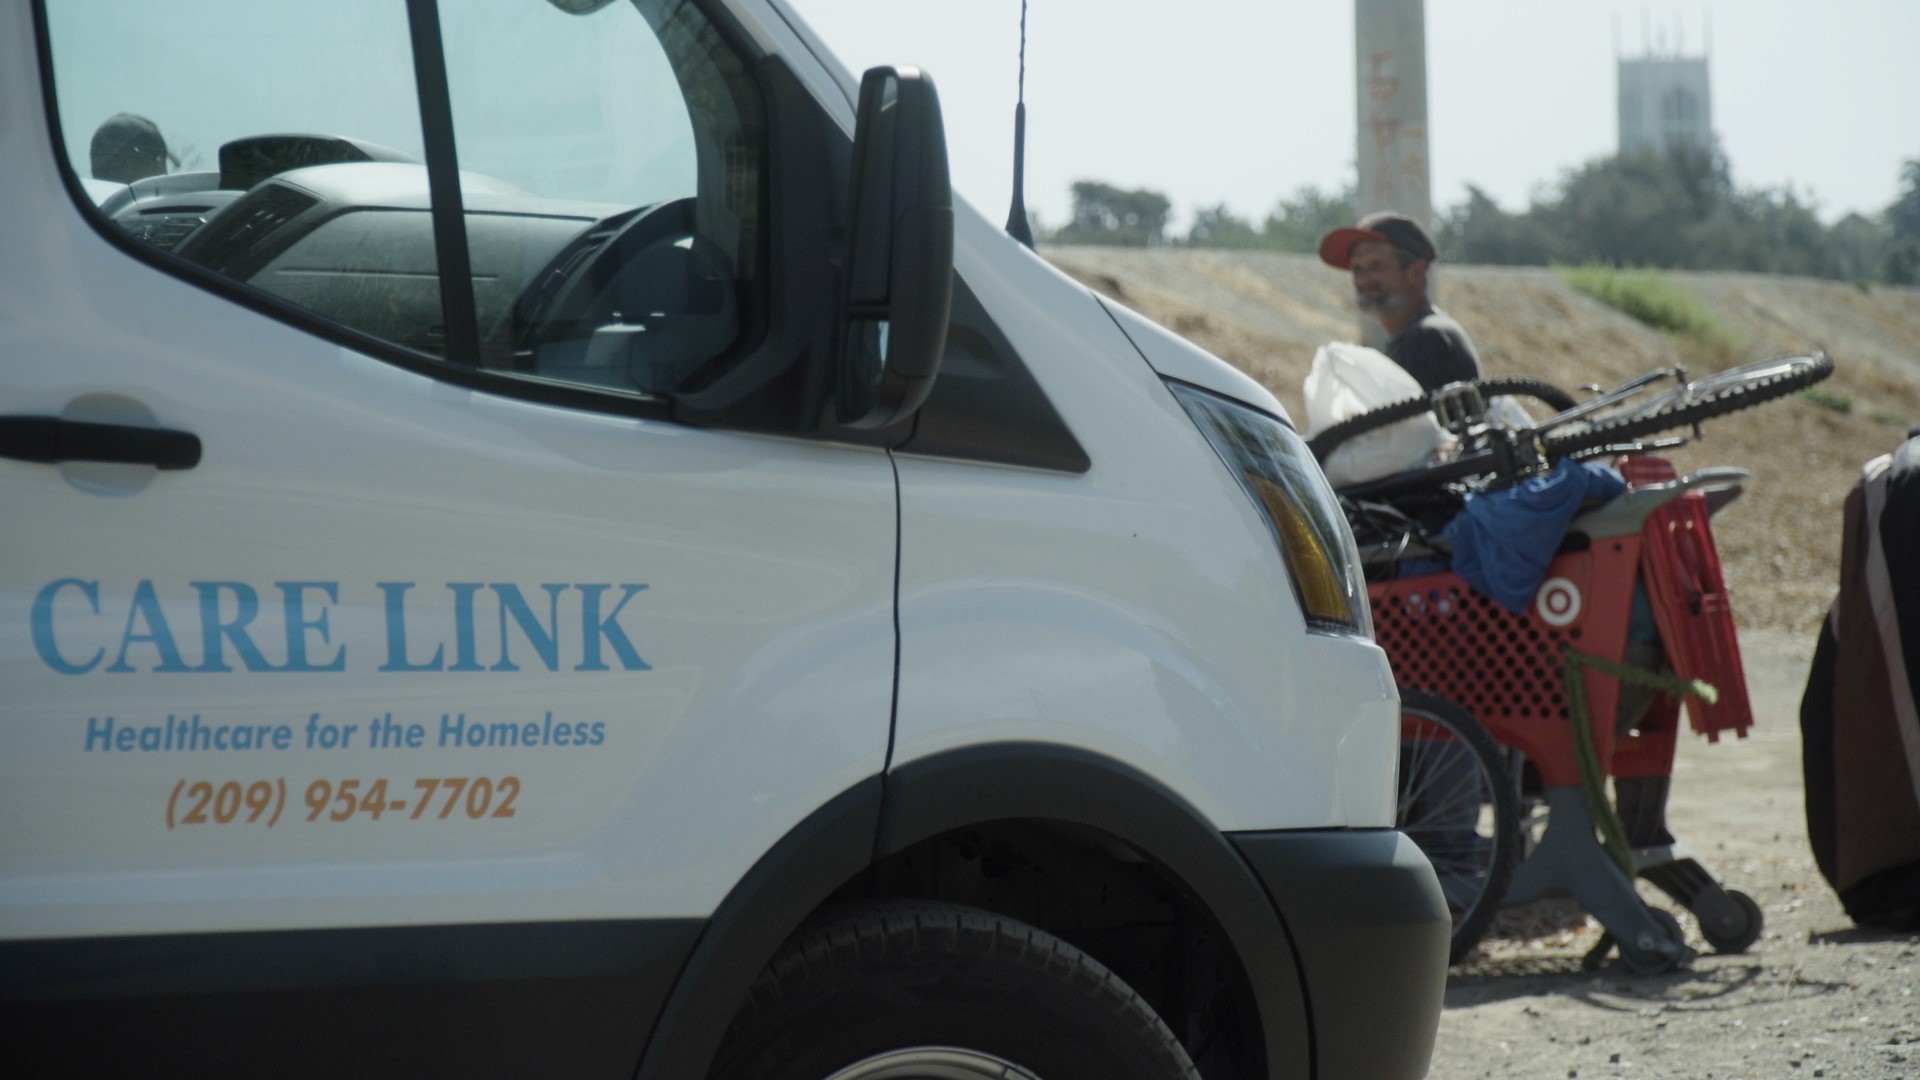 Care Link Healthcare's mobile clinic helps those who are homeless in the Stockton area.